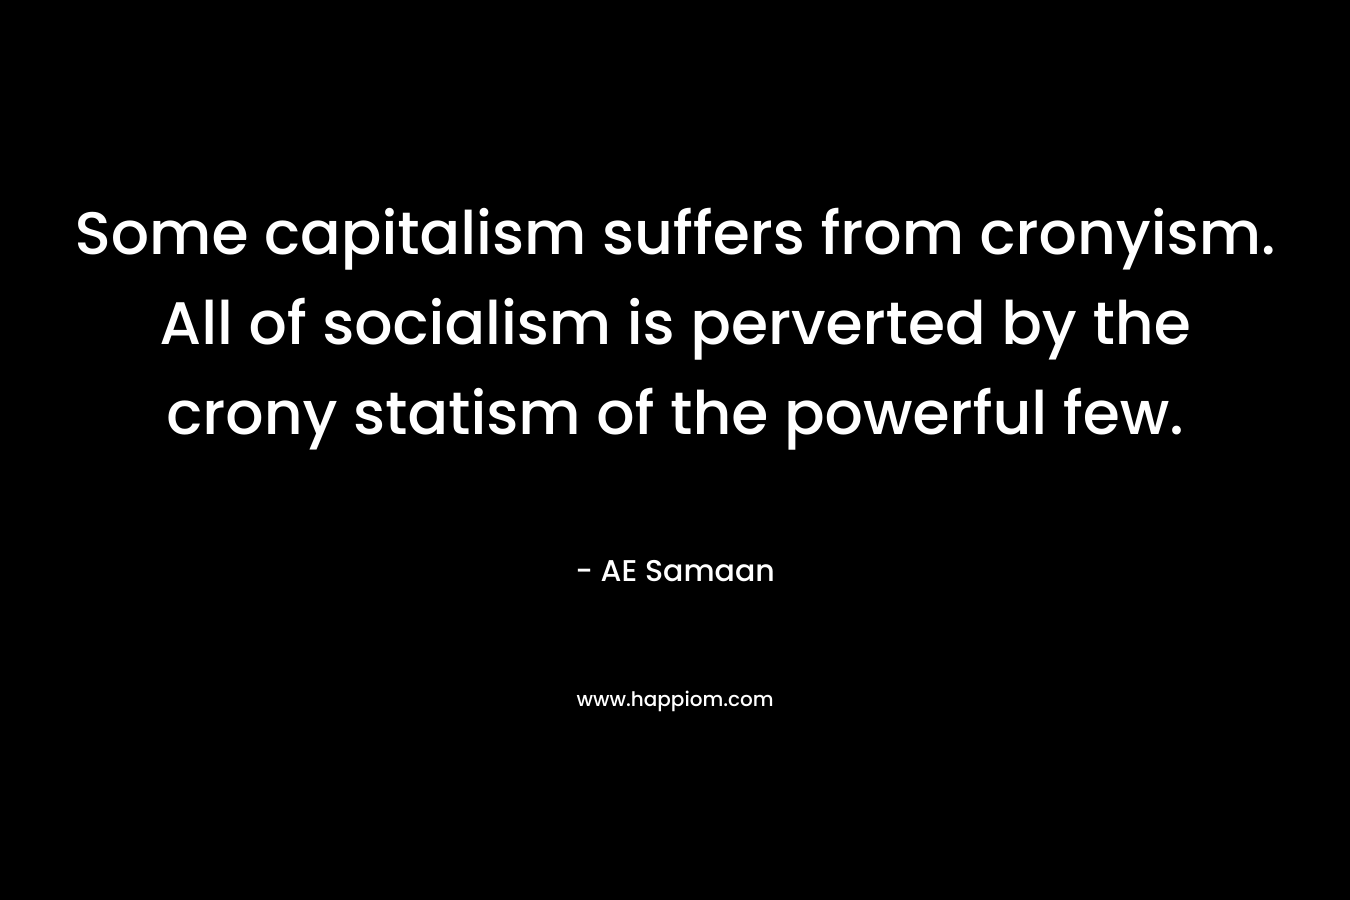 Some capitalism suffers from cronyism. All of socialism is perverted by the crony statism of the powerful few. – AE Samaan